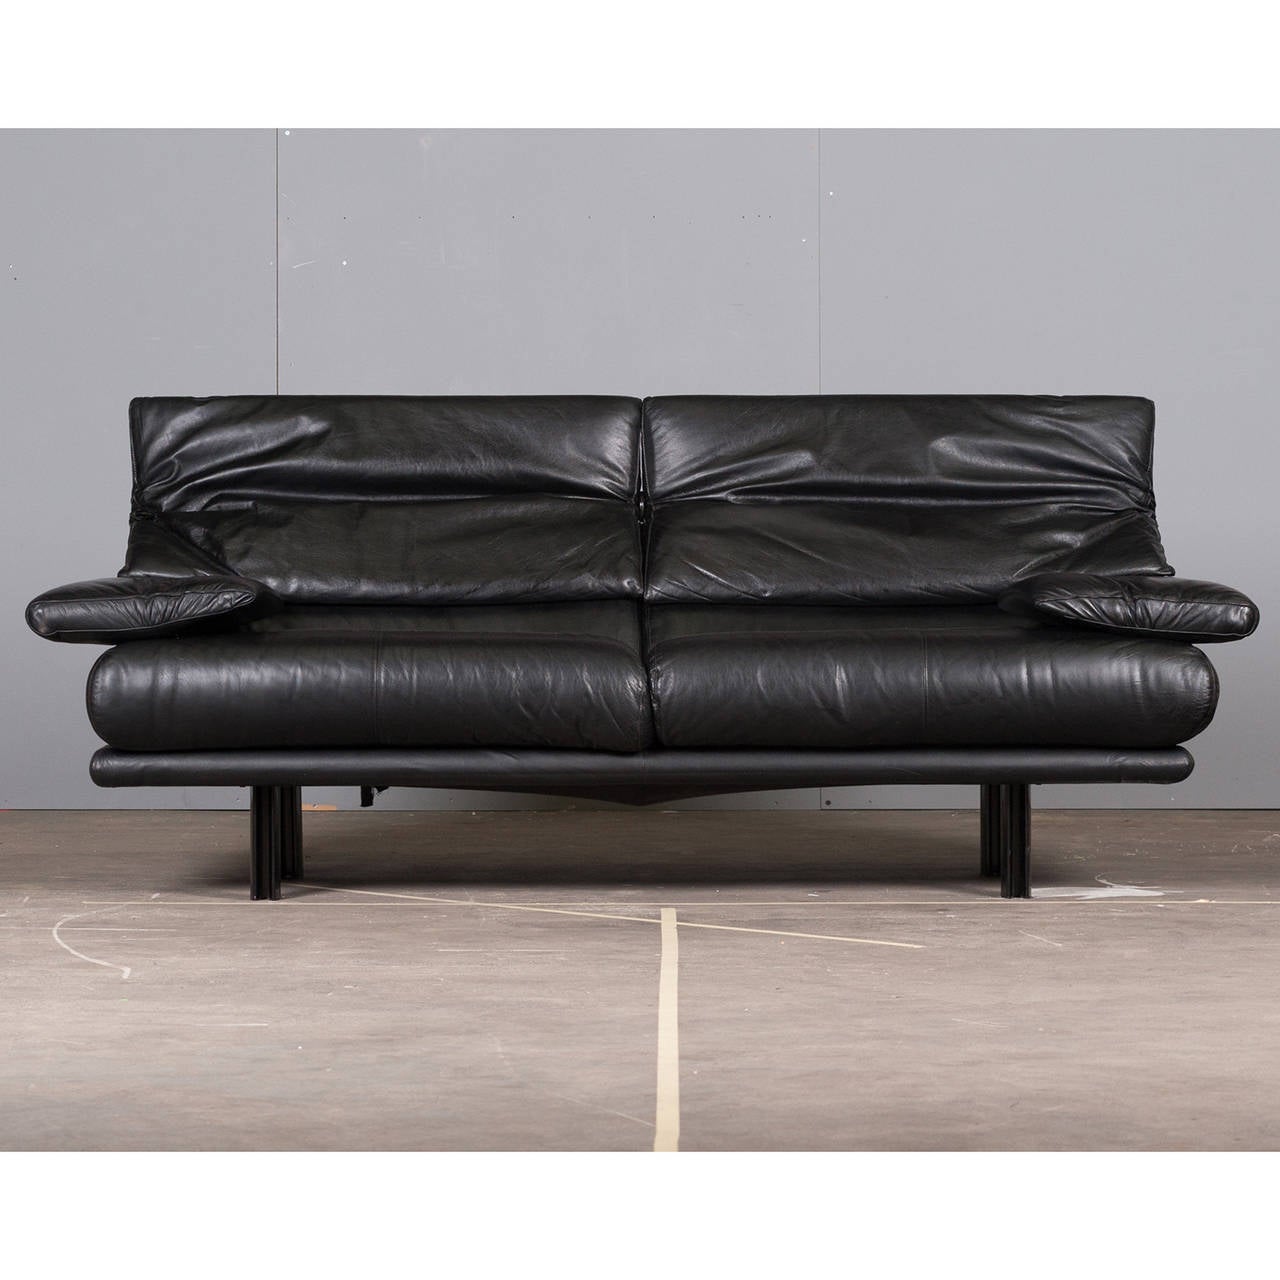 Lounge out in this amazing Paolo Piva 'Alanda' sofa, by B&B Italia! Beautiful black leather, adjustable headrest and armrest cushions with black enamelled metal legs. This fabulous sofa is in excellent condition.

We are delighted to be offering